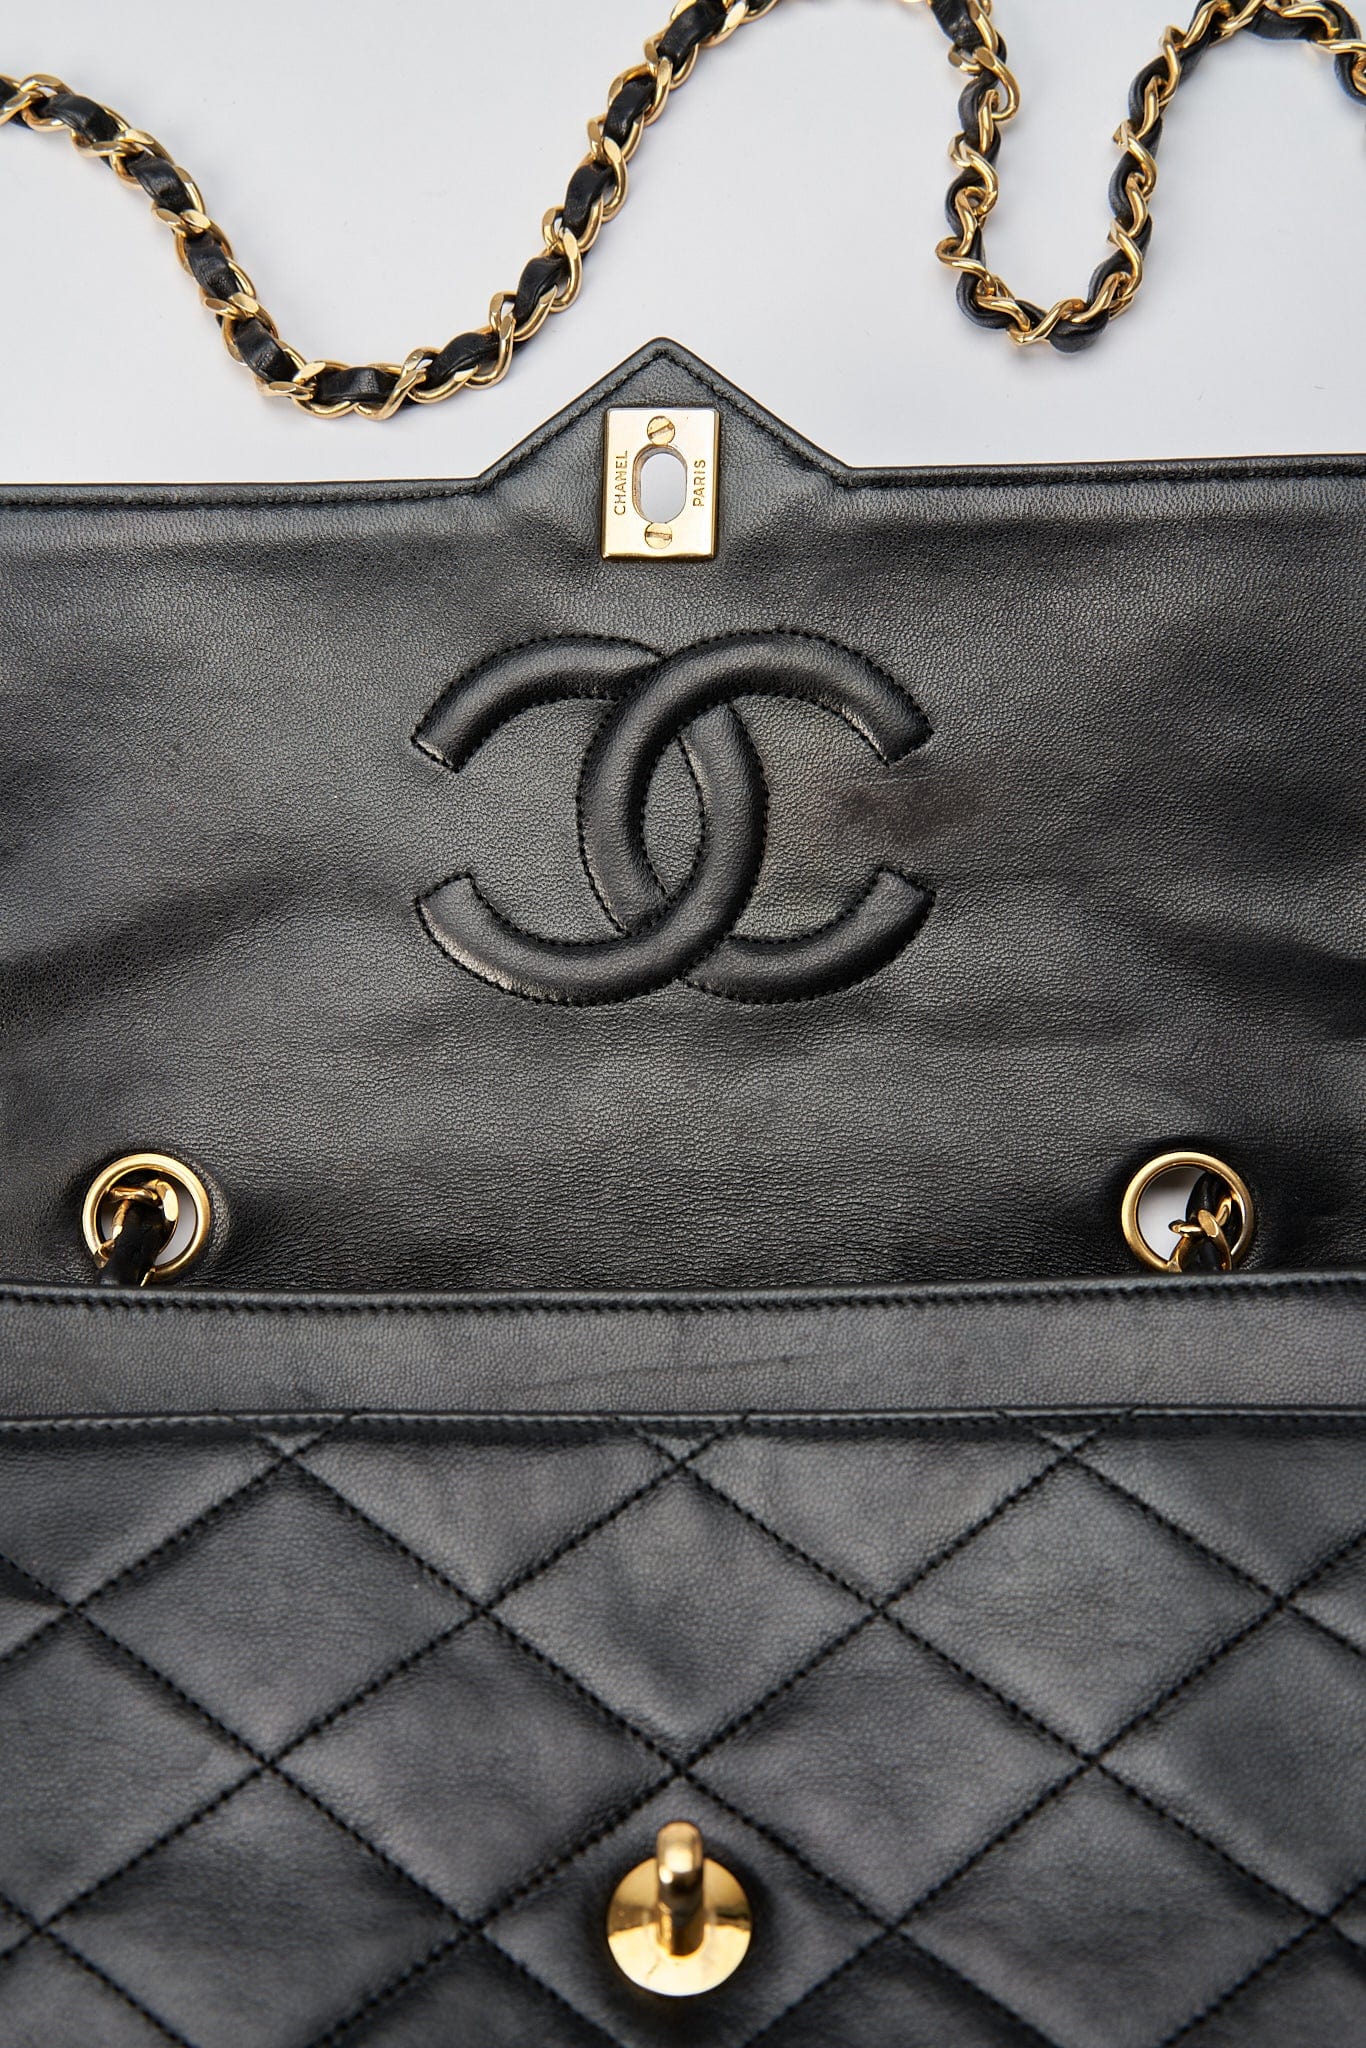 Chanel Vintage Single Flap with 24k gold plated hardware and V design